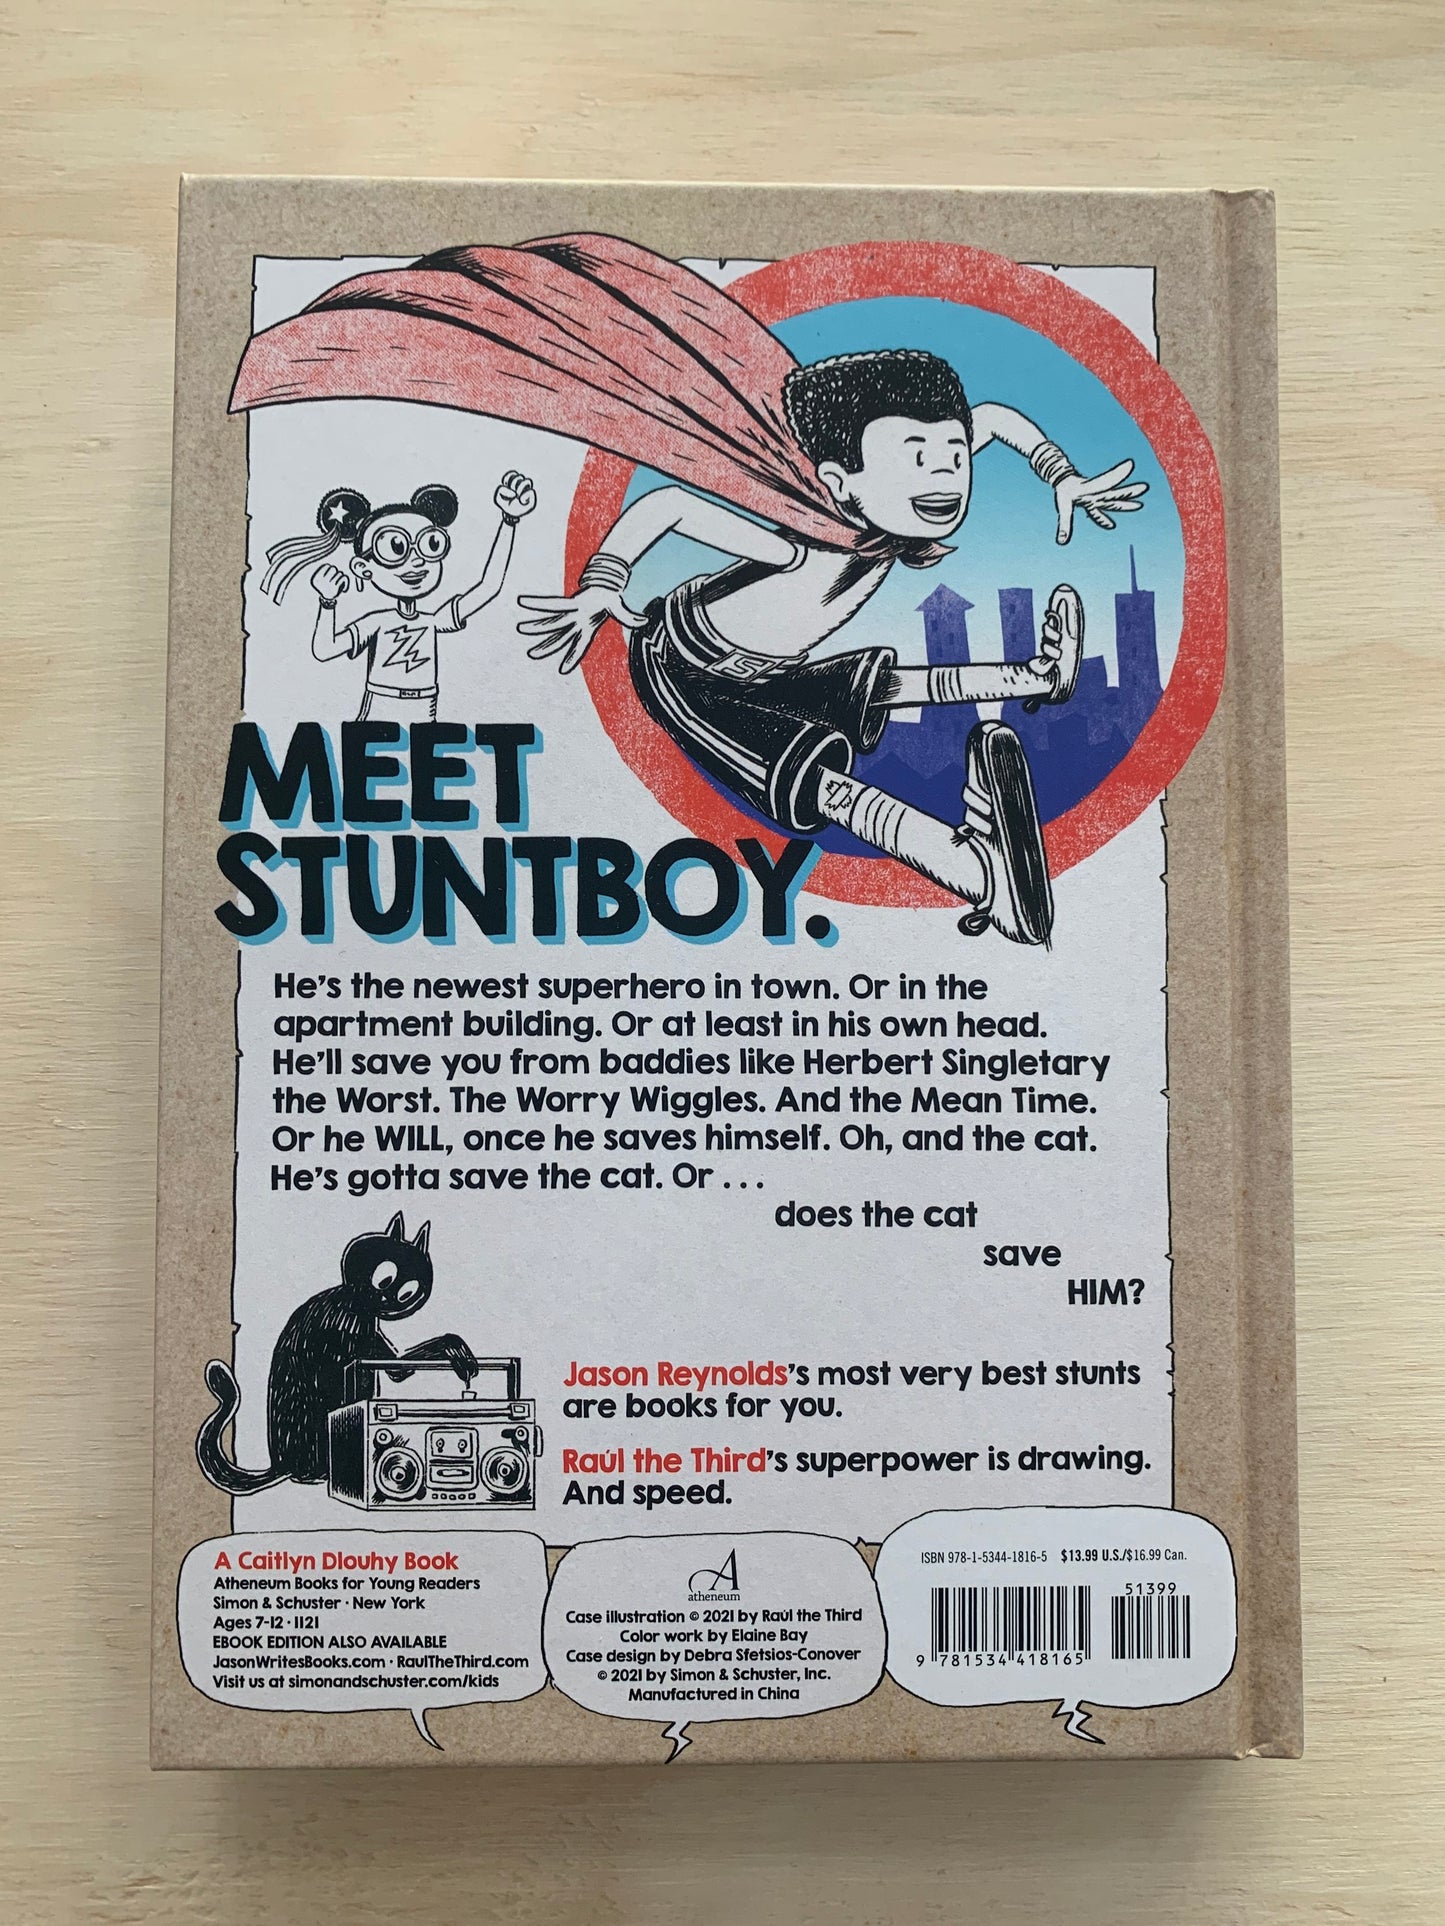 Stuntboy, In The Meantime (Book 1)